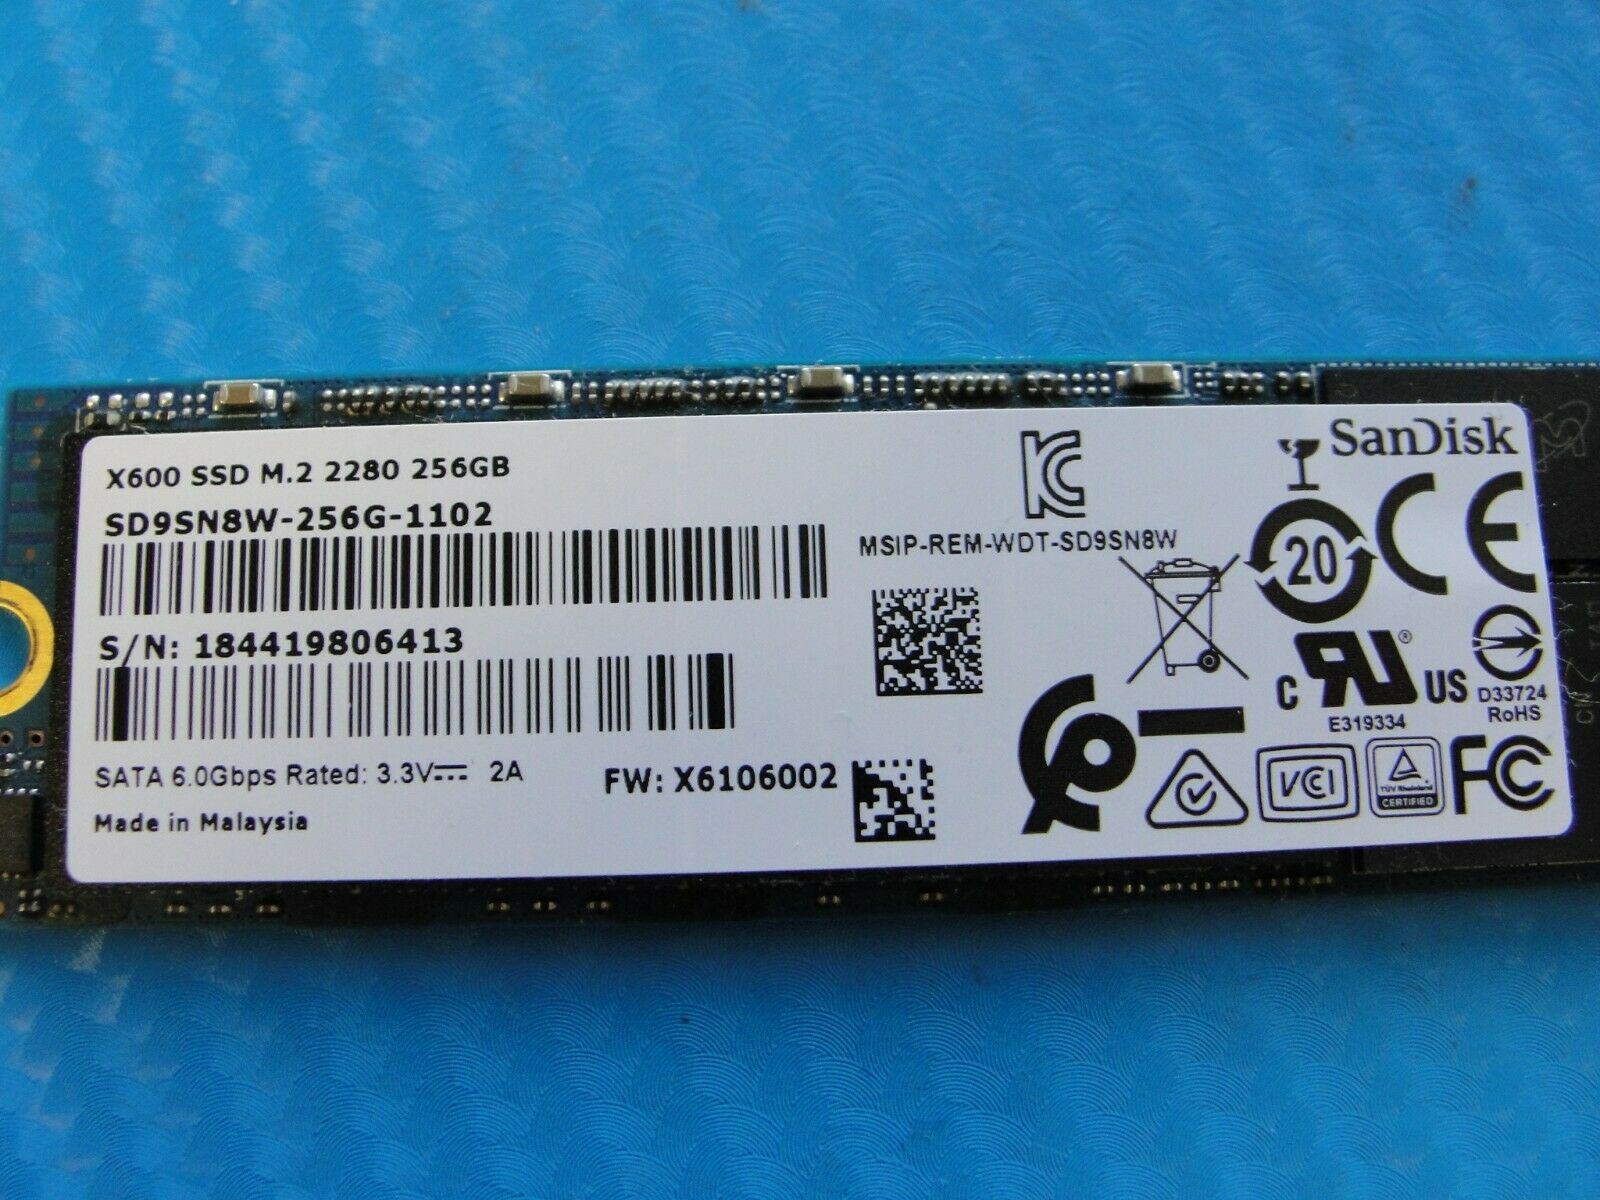 SanDisk X600 M.2 2280 NVMe 256GB SD9SN8W-256G-1102 Laptop SSD Solid State Drive 